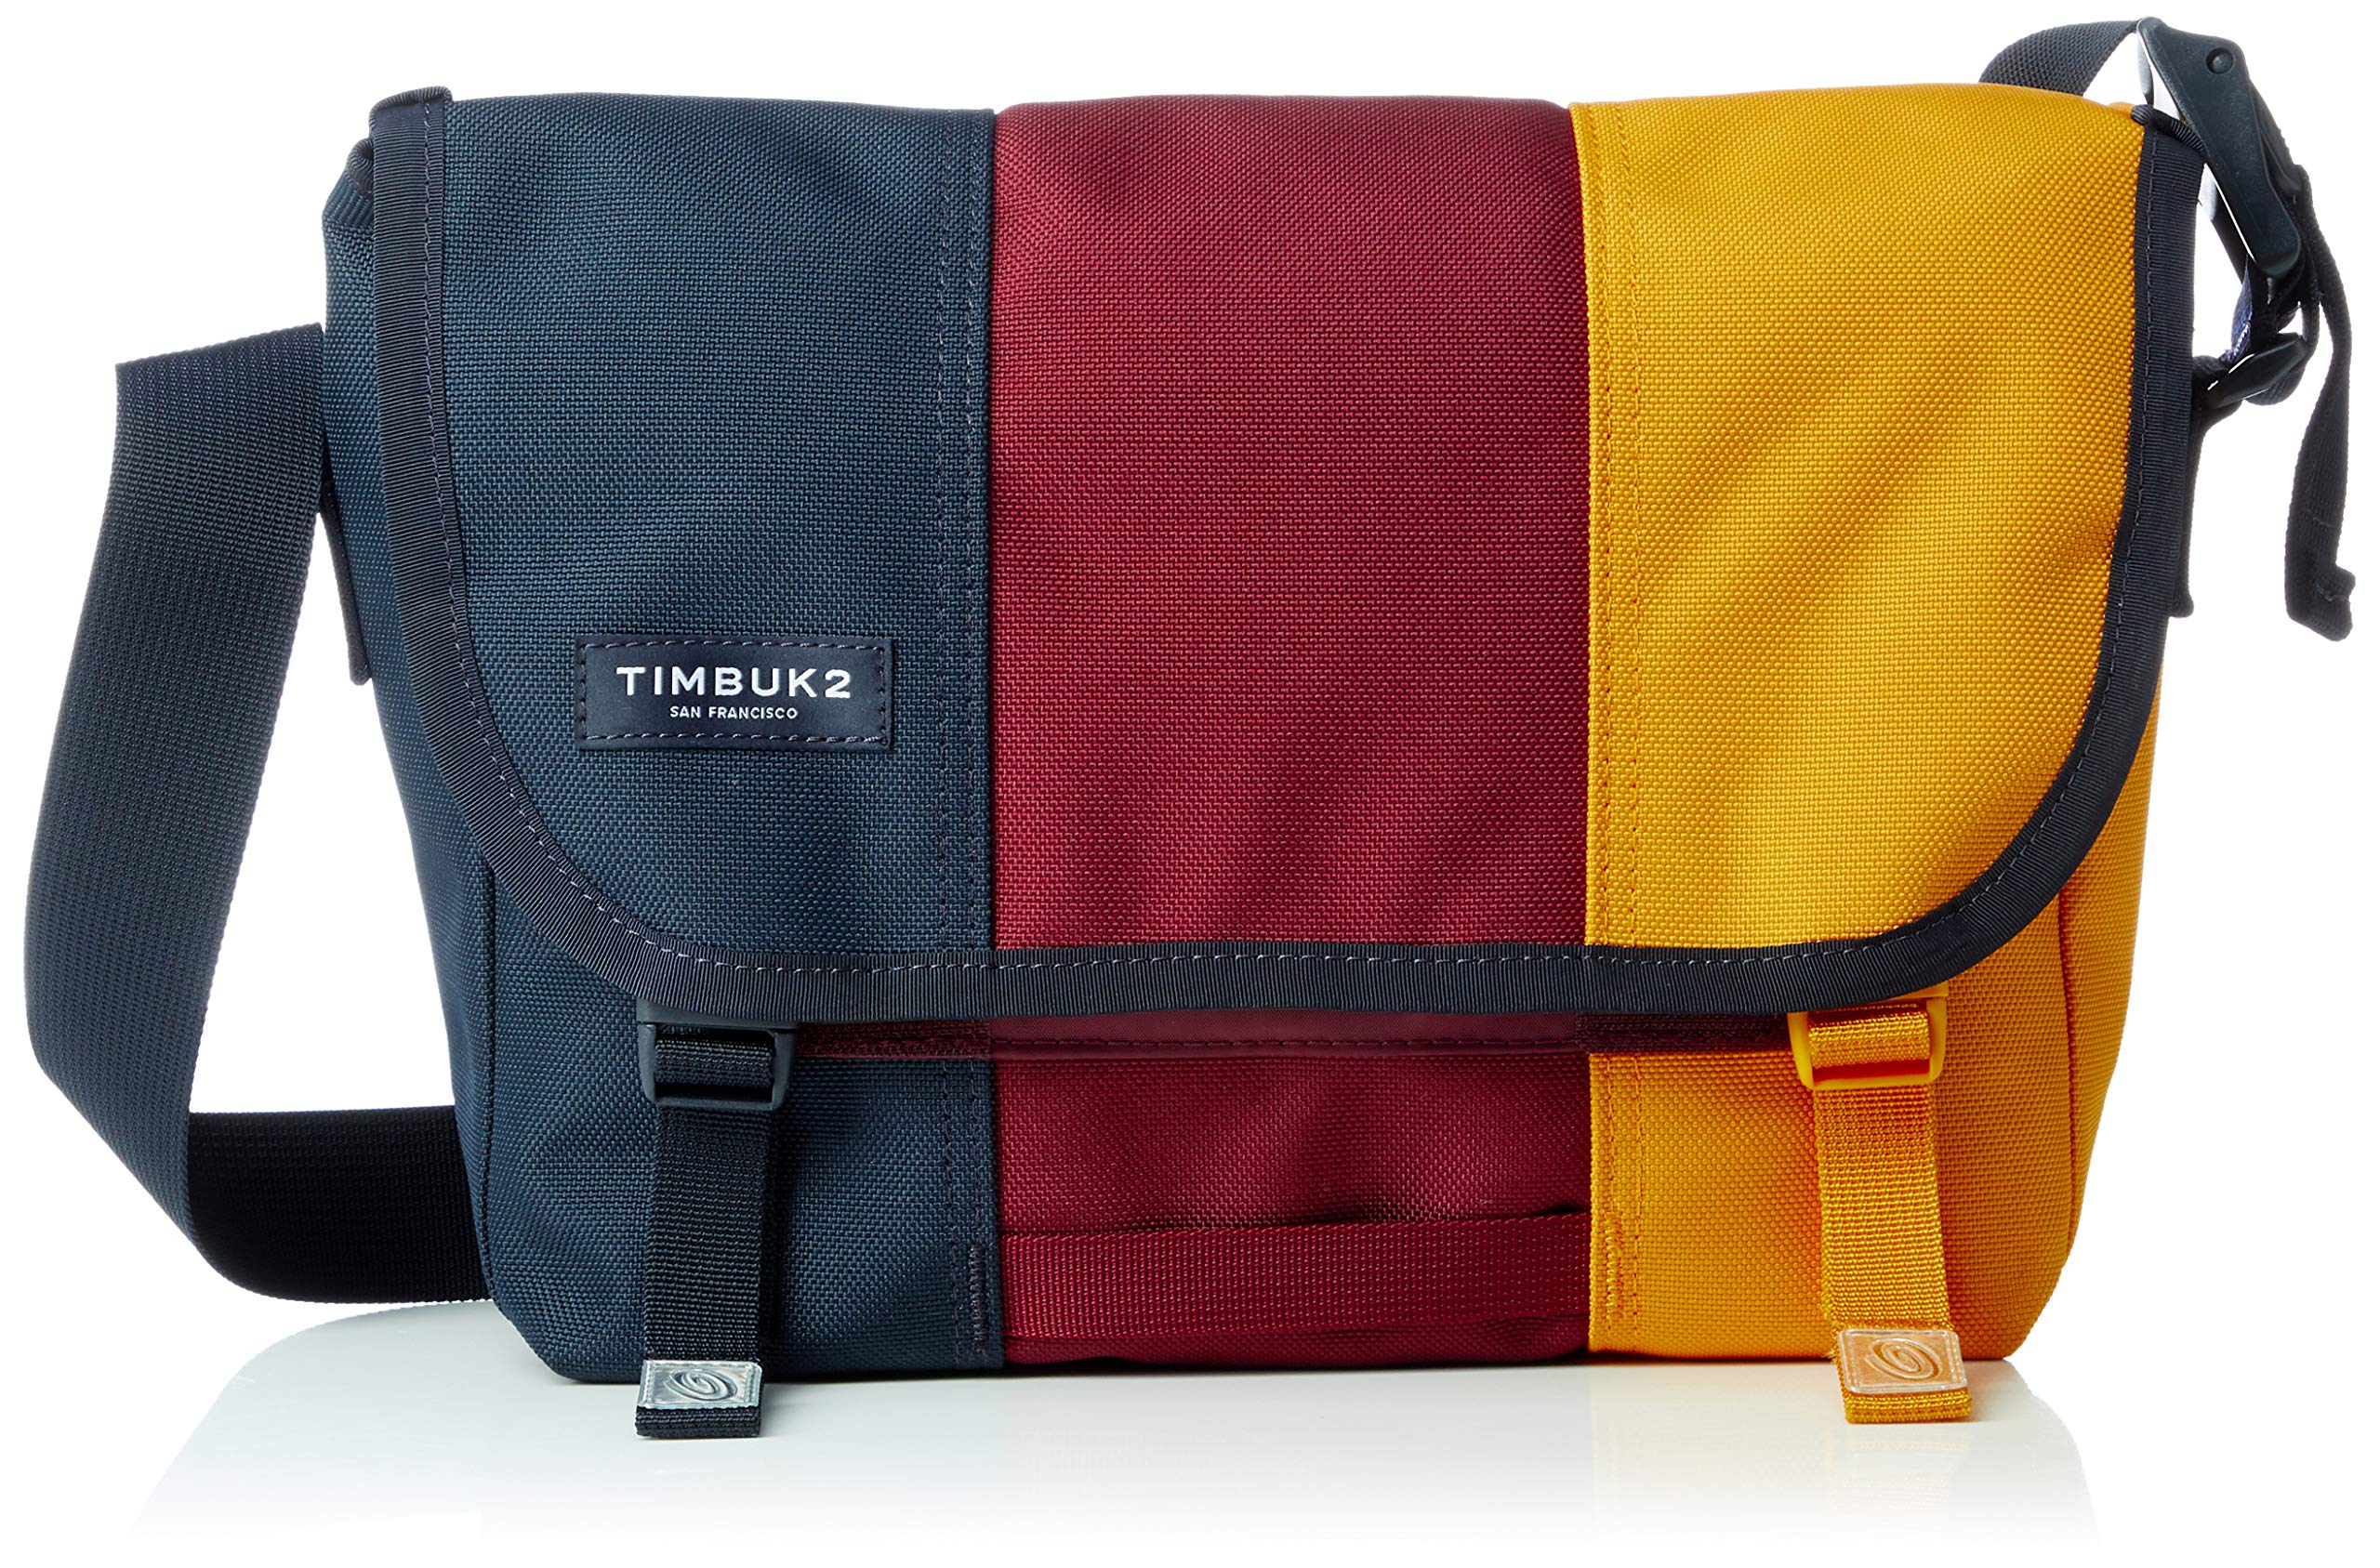 Timbuk2's XS Messenger Bag is compact and iPad-ready: $61.50 (Over 20% off)